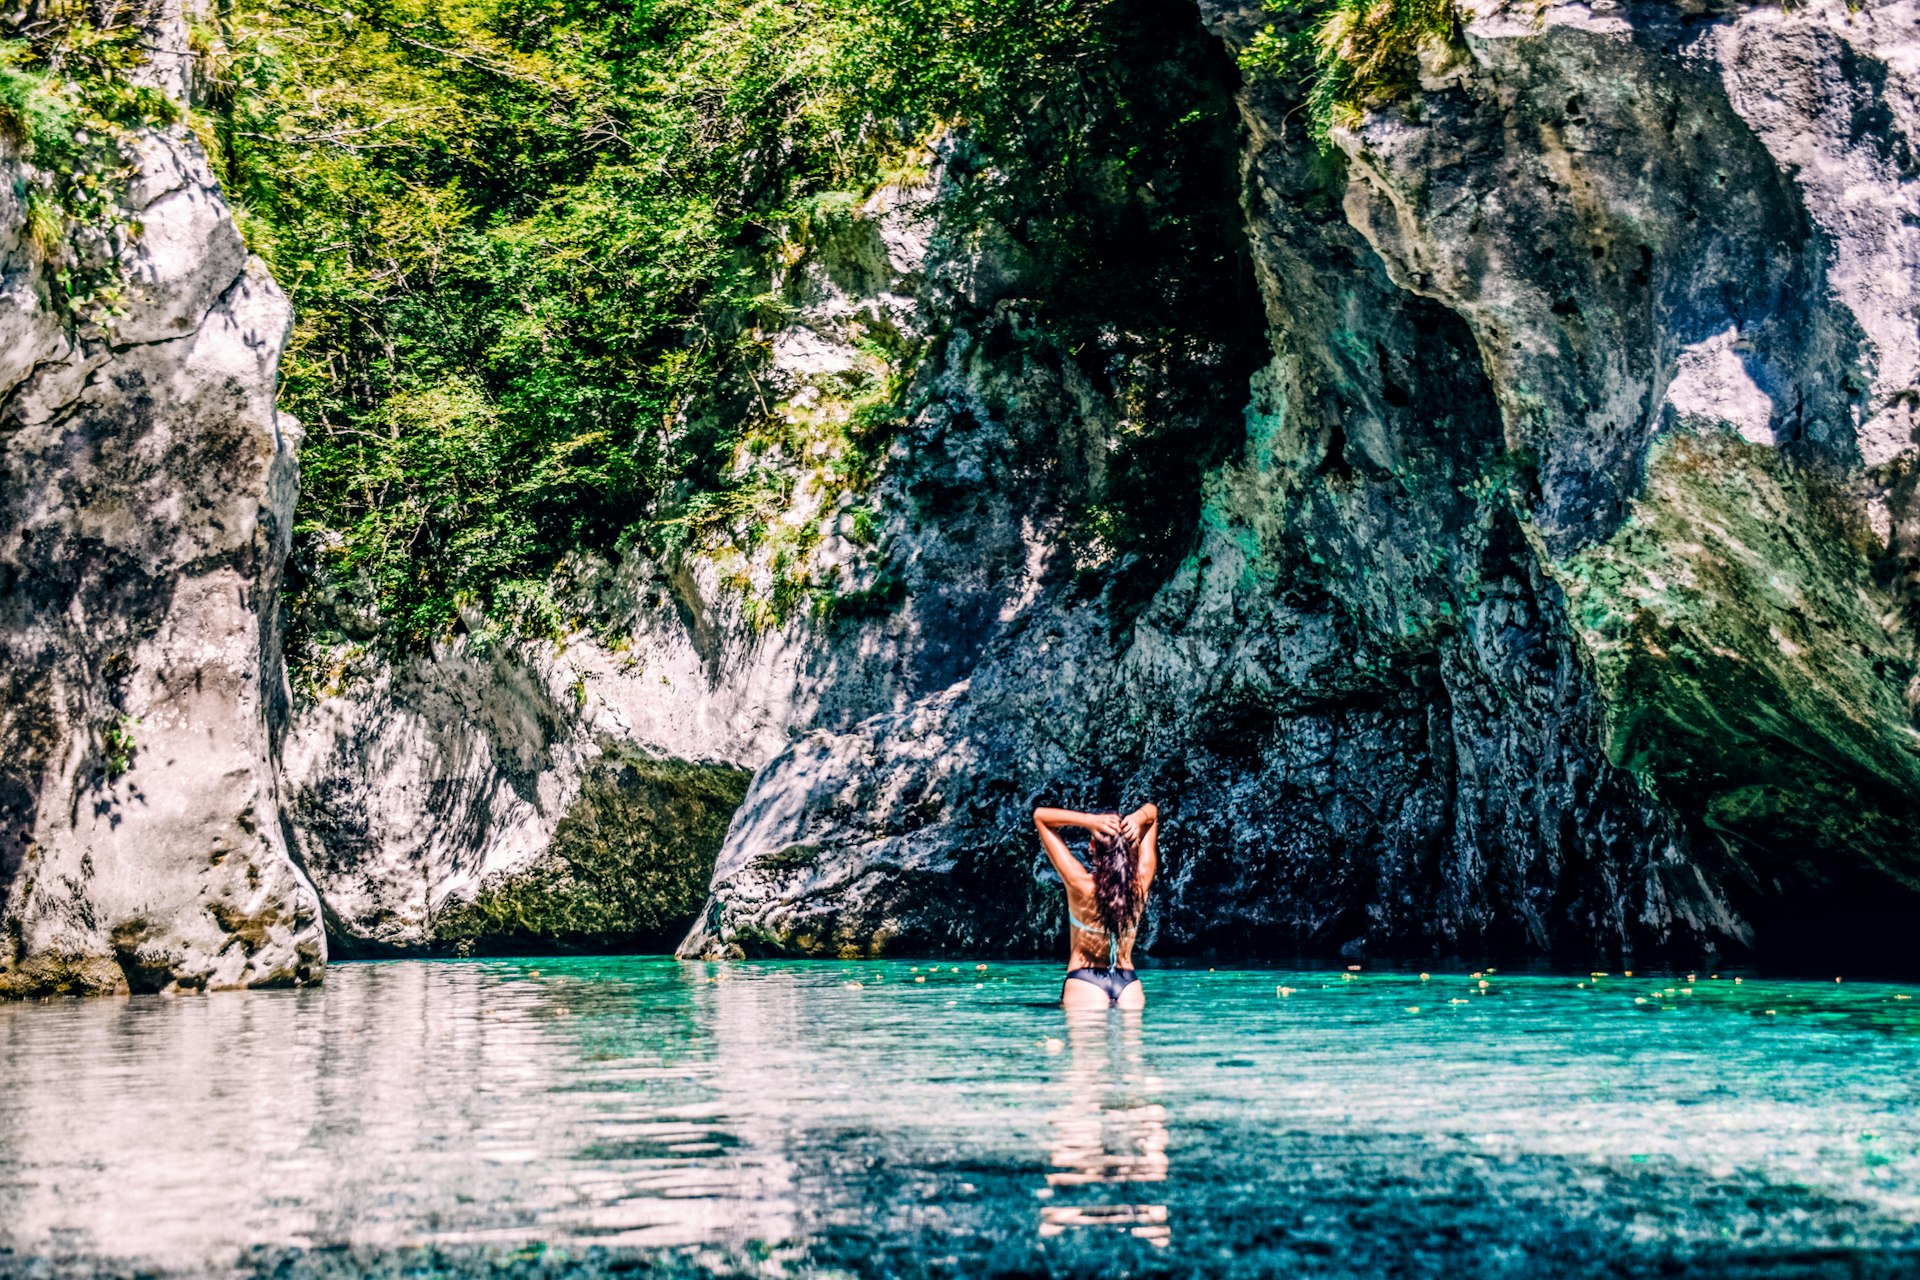 A woman slicks back her wet hair after swimming in the turquoise Soča River with hulking rocks in front of her